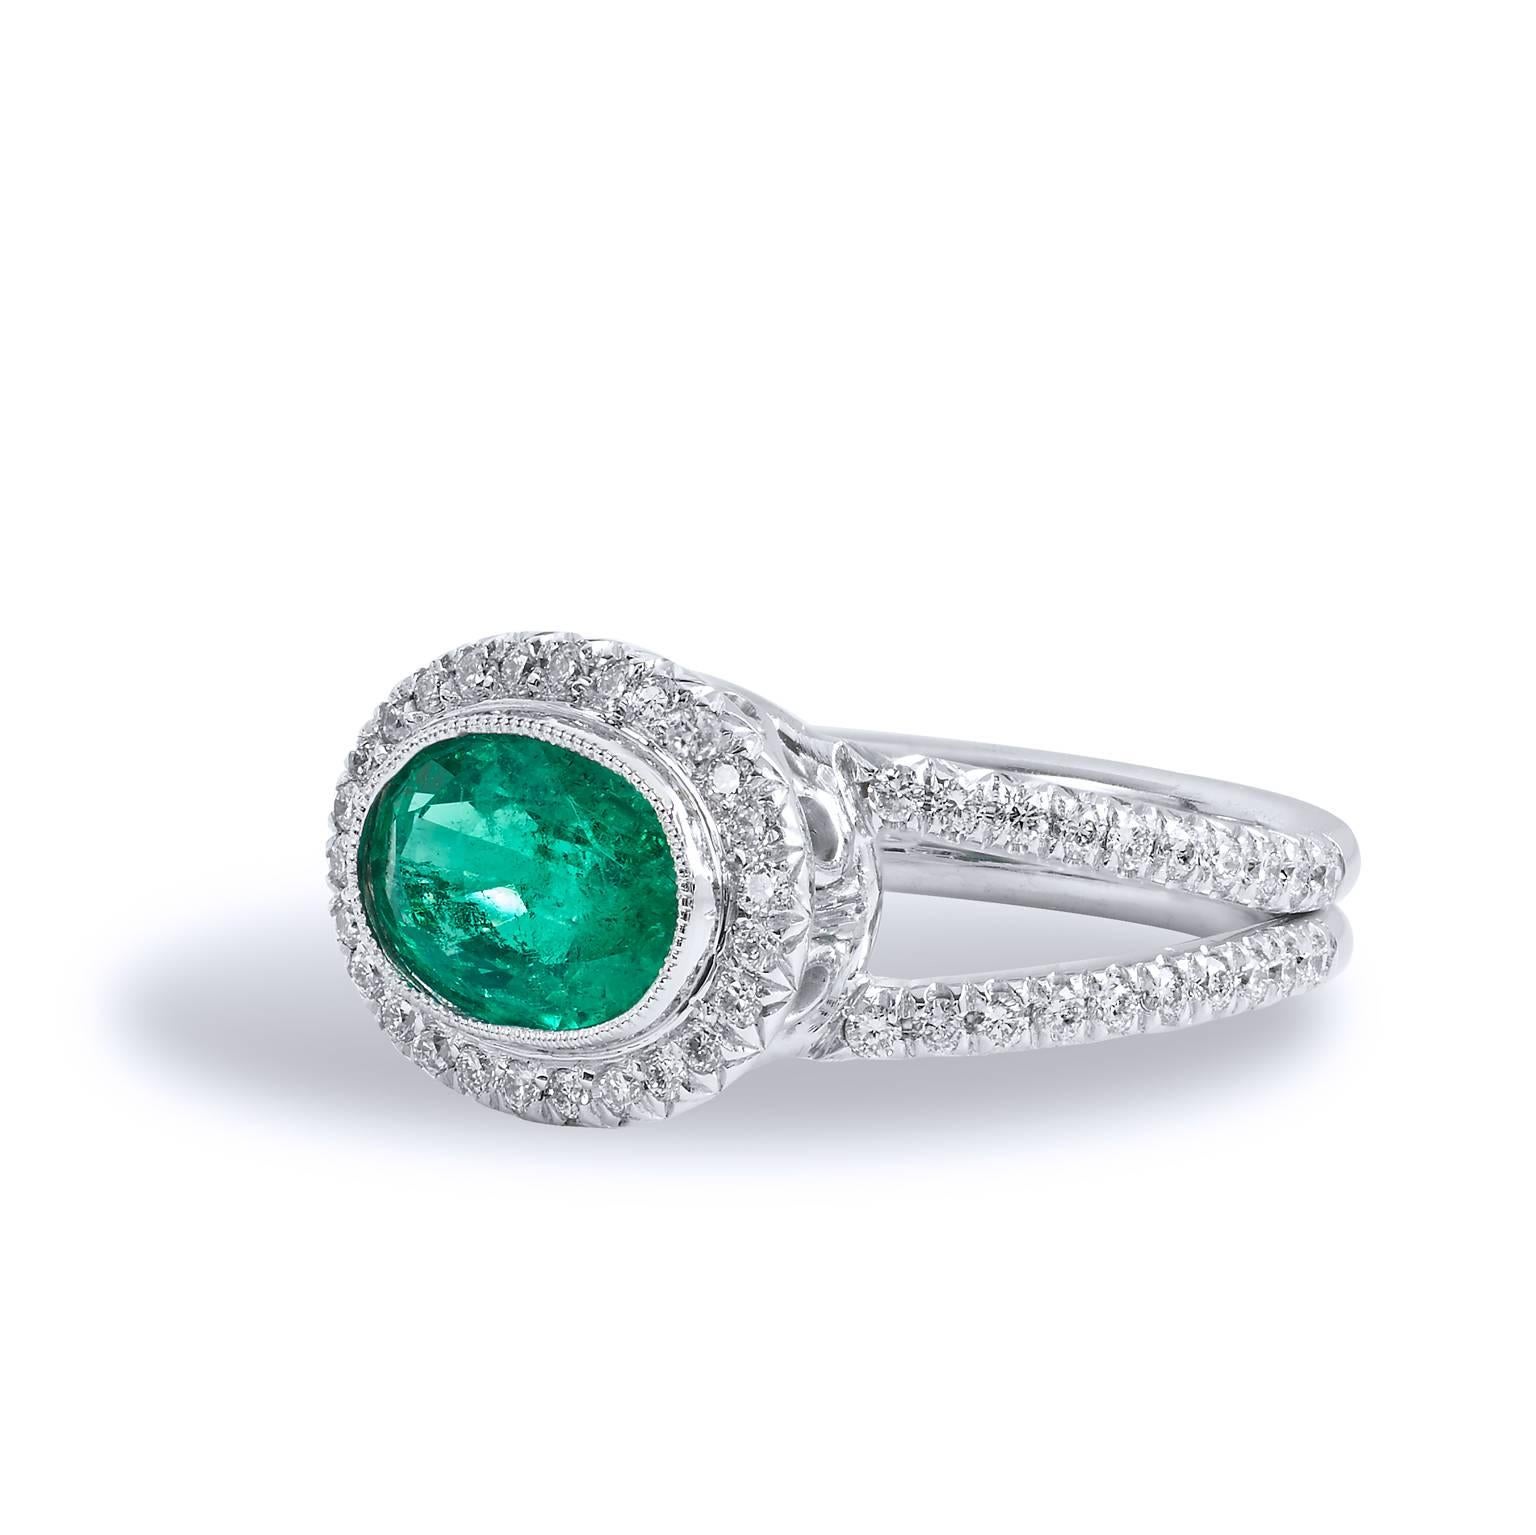 18kt white palladium forms the base for this luscious handmade Emerald and Diamond ring. Taking center stage is a 1.84 carat oval cut Zambian Emerald displaying a vivid green hue. Clutching the center gemstone and trailing down the split shank are